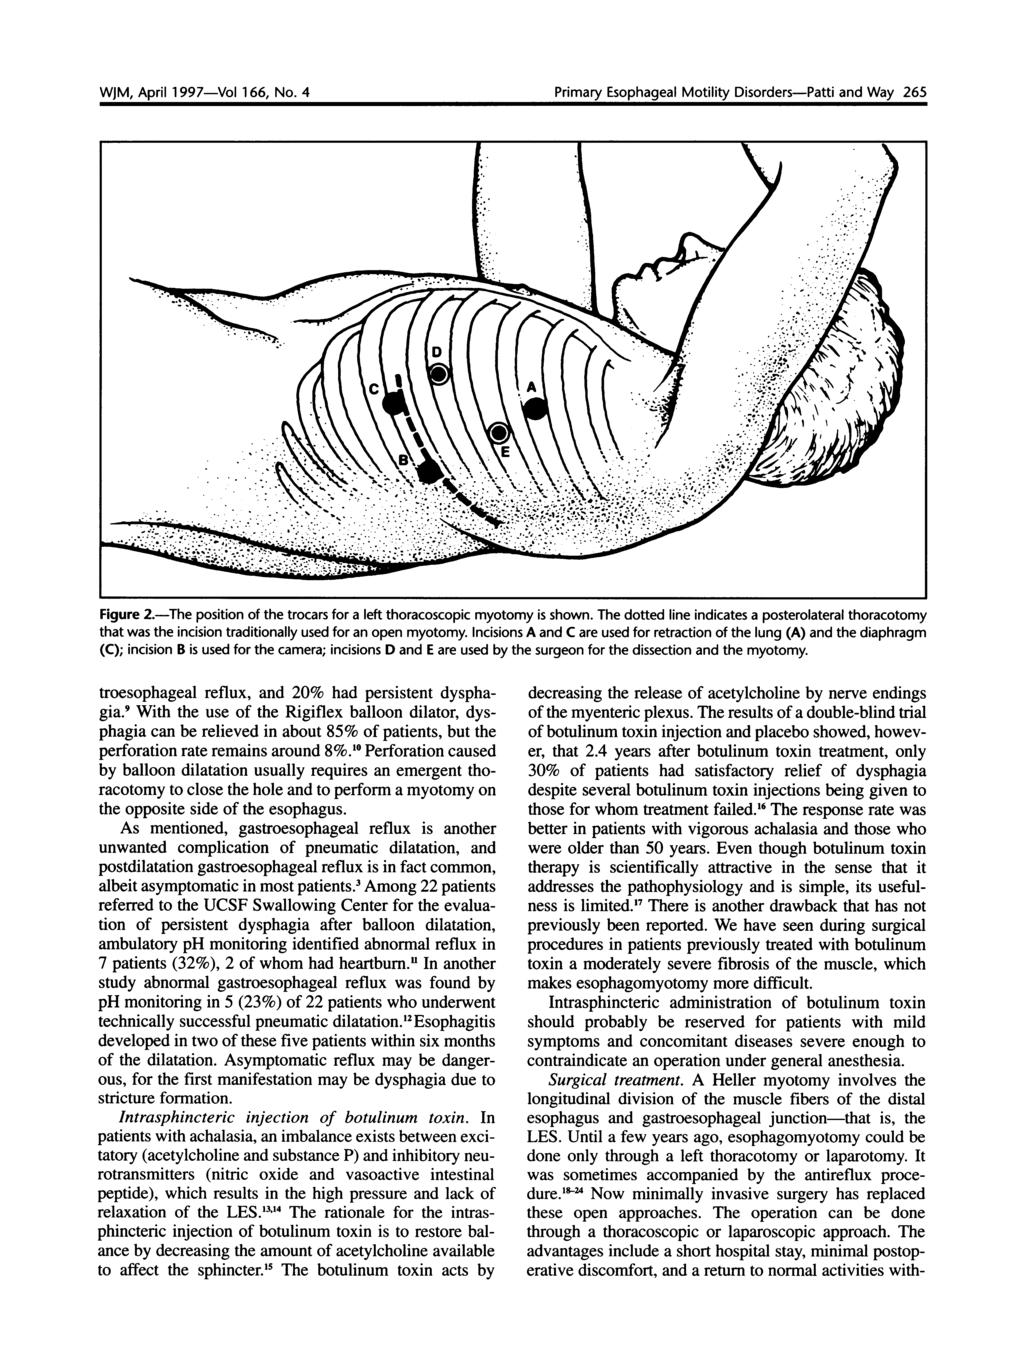 WJM, April 1997-Vol 166, No. 4 Primary Esophageal Motility Disorders-Patti and Way 265 WJM,~~ 97Vl16 Api Figure 2.-The position of the trocars for a left thoracoscopic myotomy is shown.